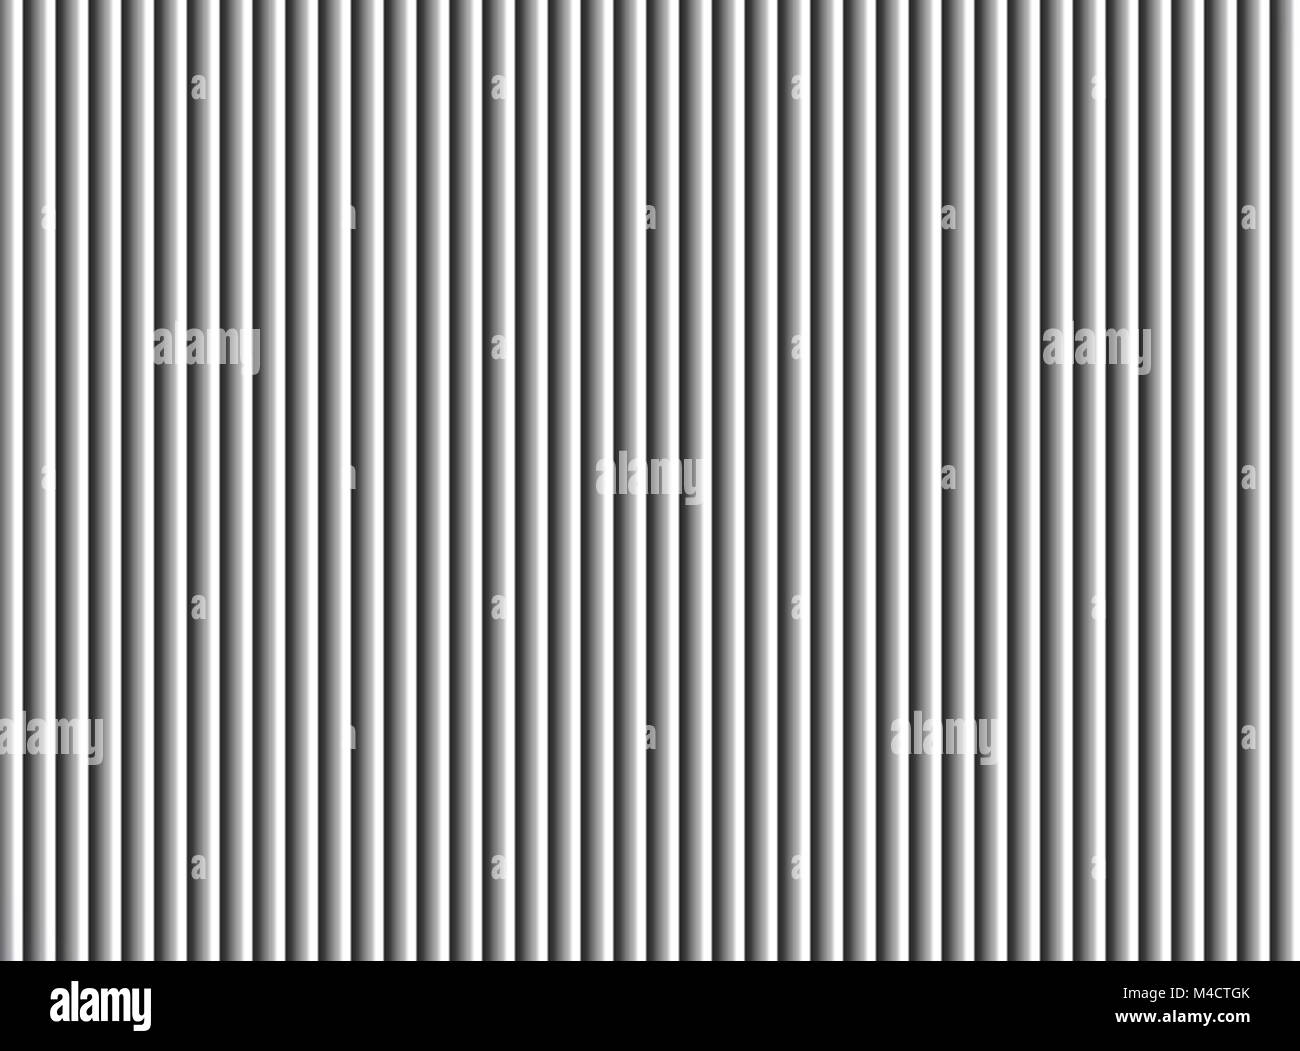 Abstract gray and white stripes background decorative advertising pattern Stock Photo